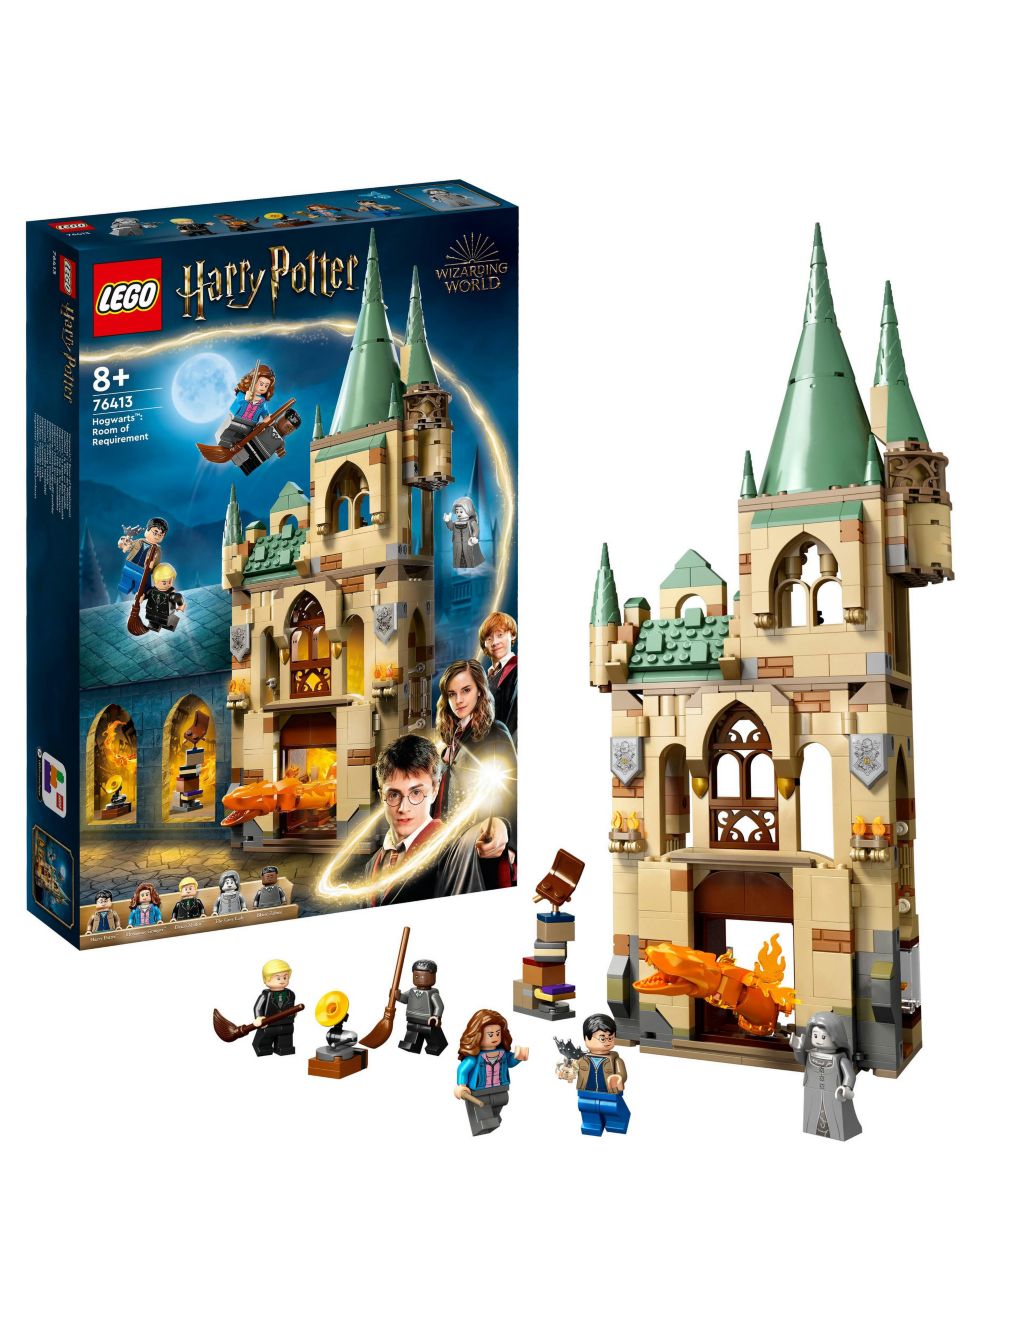 LEGO Harry Potter Hogwarts: Room of Requirement 76413 (8+ Yrs) 2 of 7